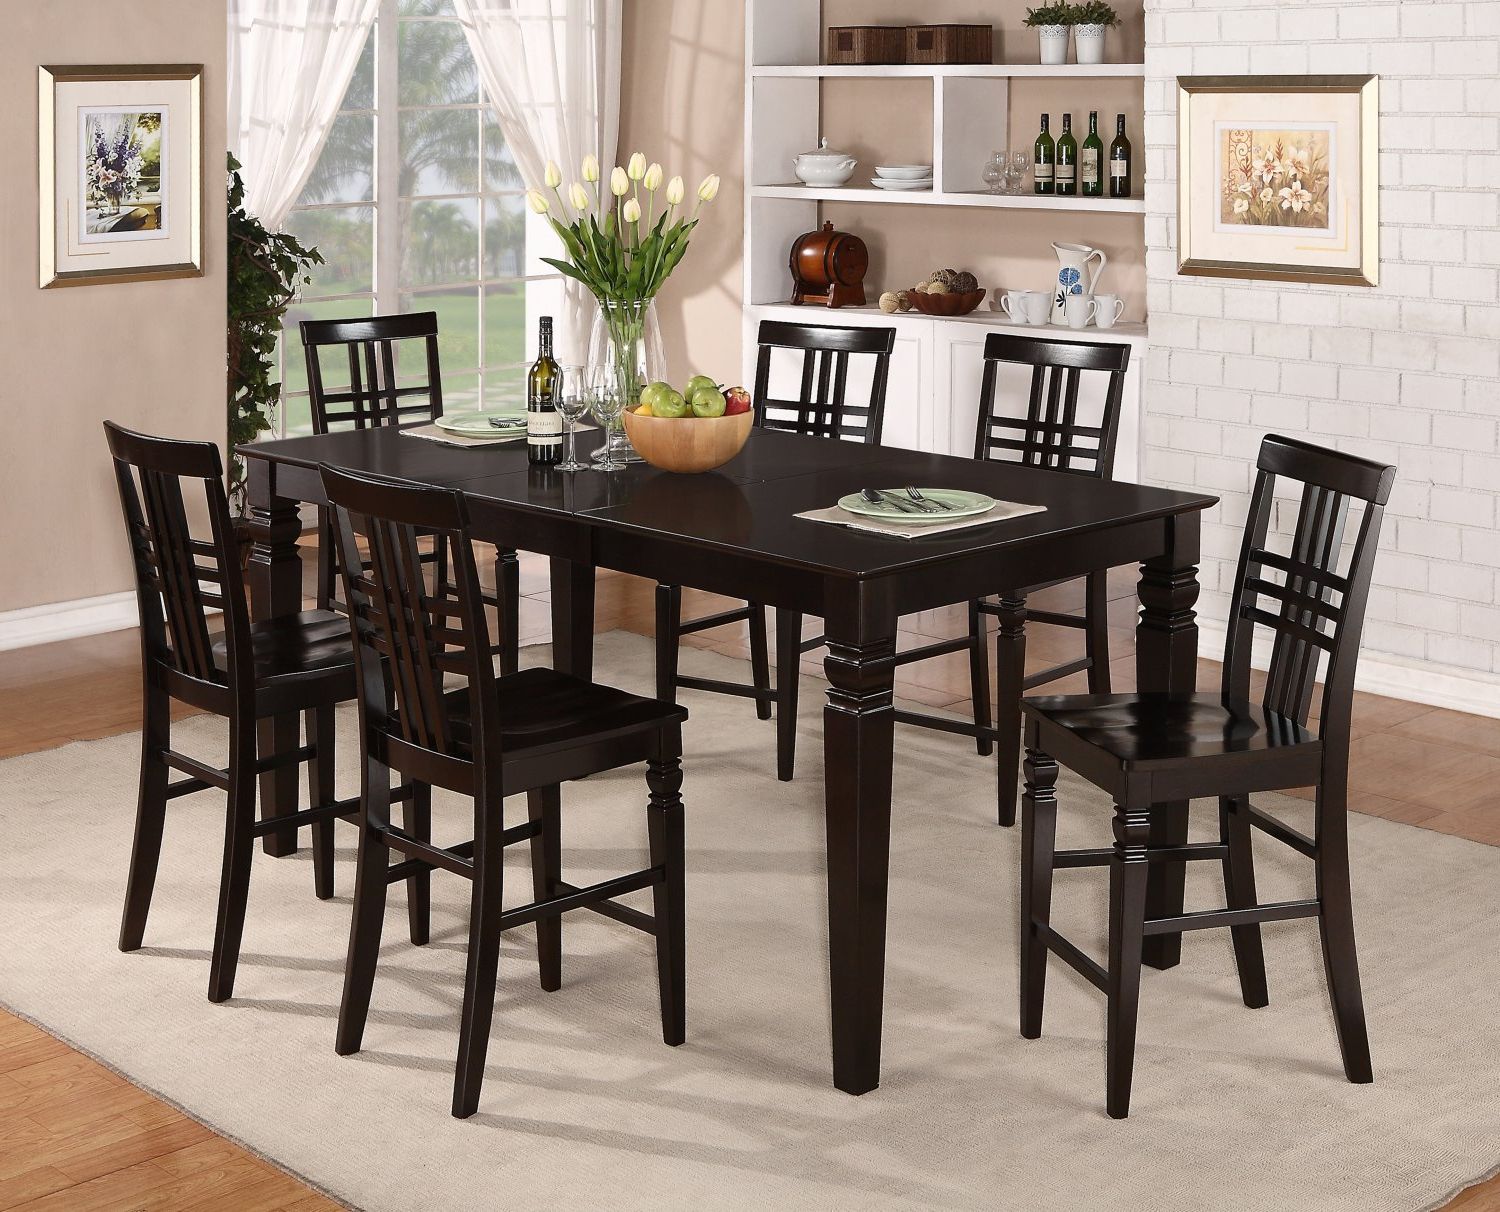 Widely Used 7 Pc Dinette Counter Height Table With 6 Wood Seat Chairs Regarding Dankrad Bar Height Dining Tables (Gallery 4 of 20)